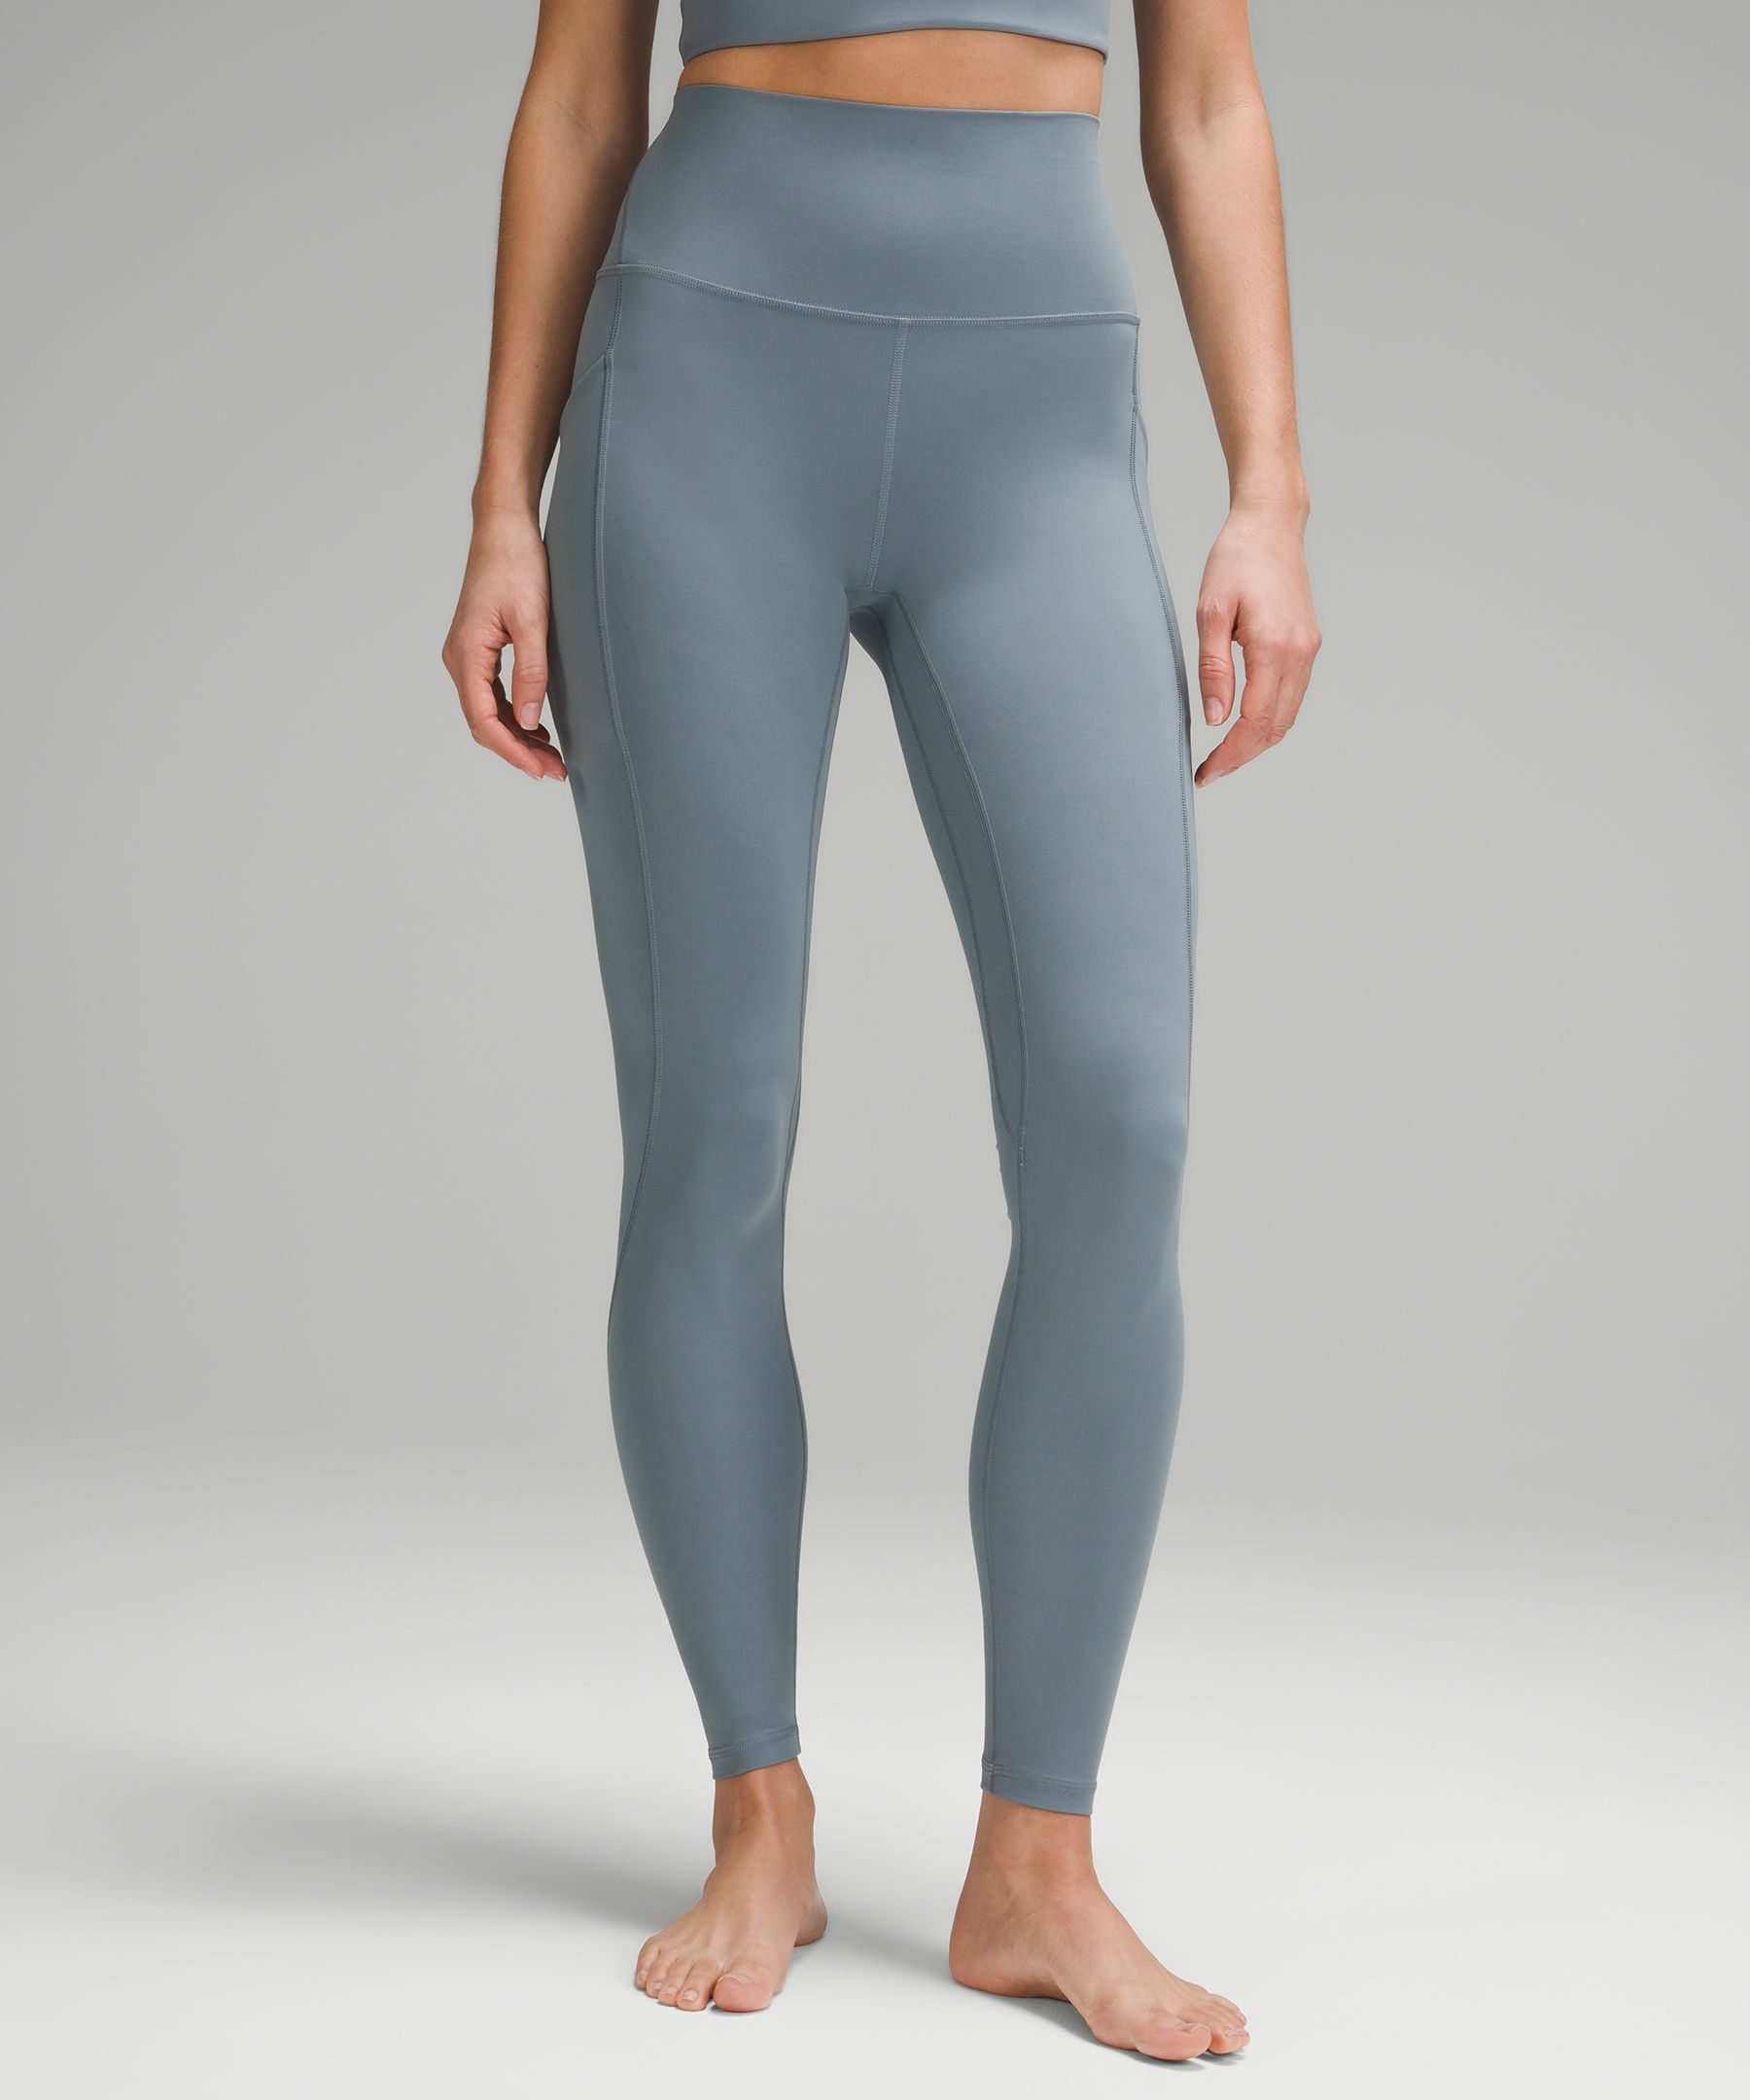 lululemon Align™ High-Rise Pant with Pockets 28 | Women's Leggings/Tights